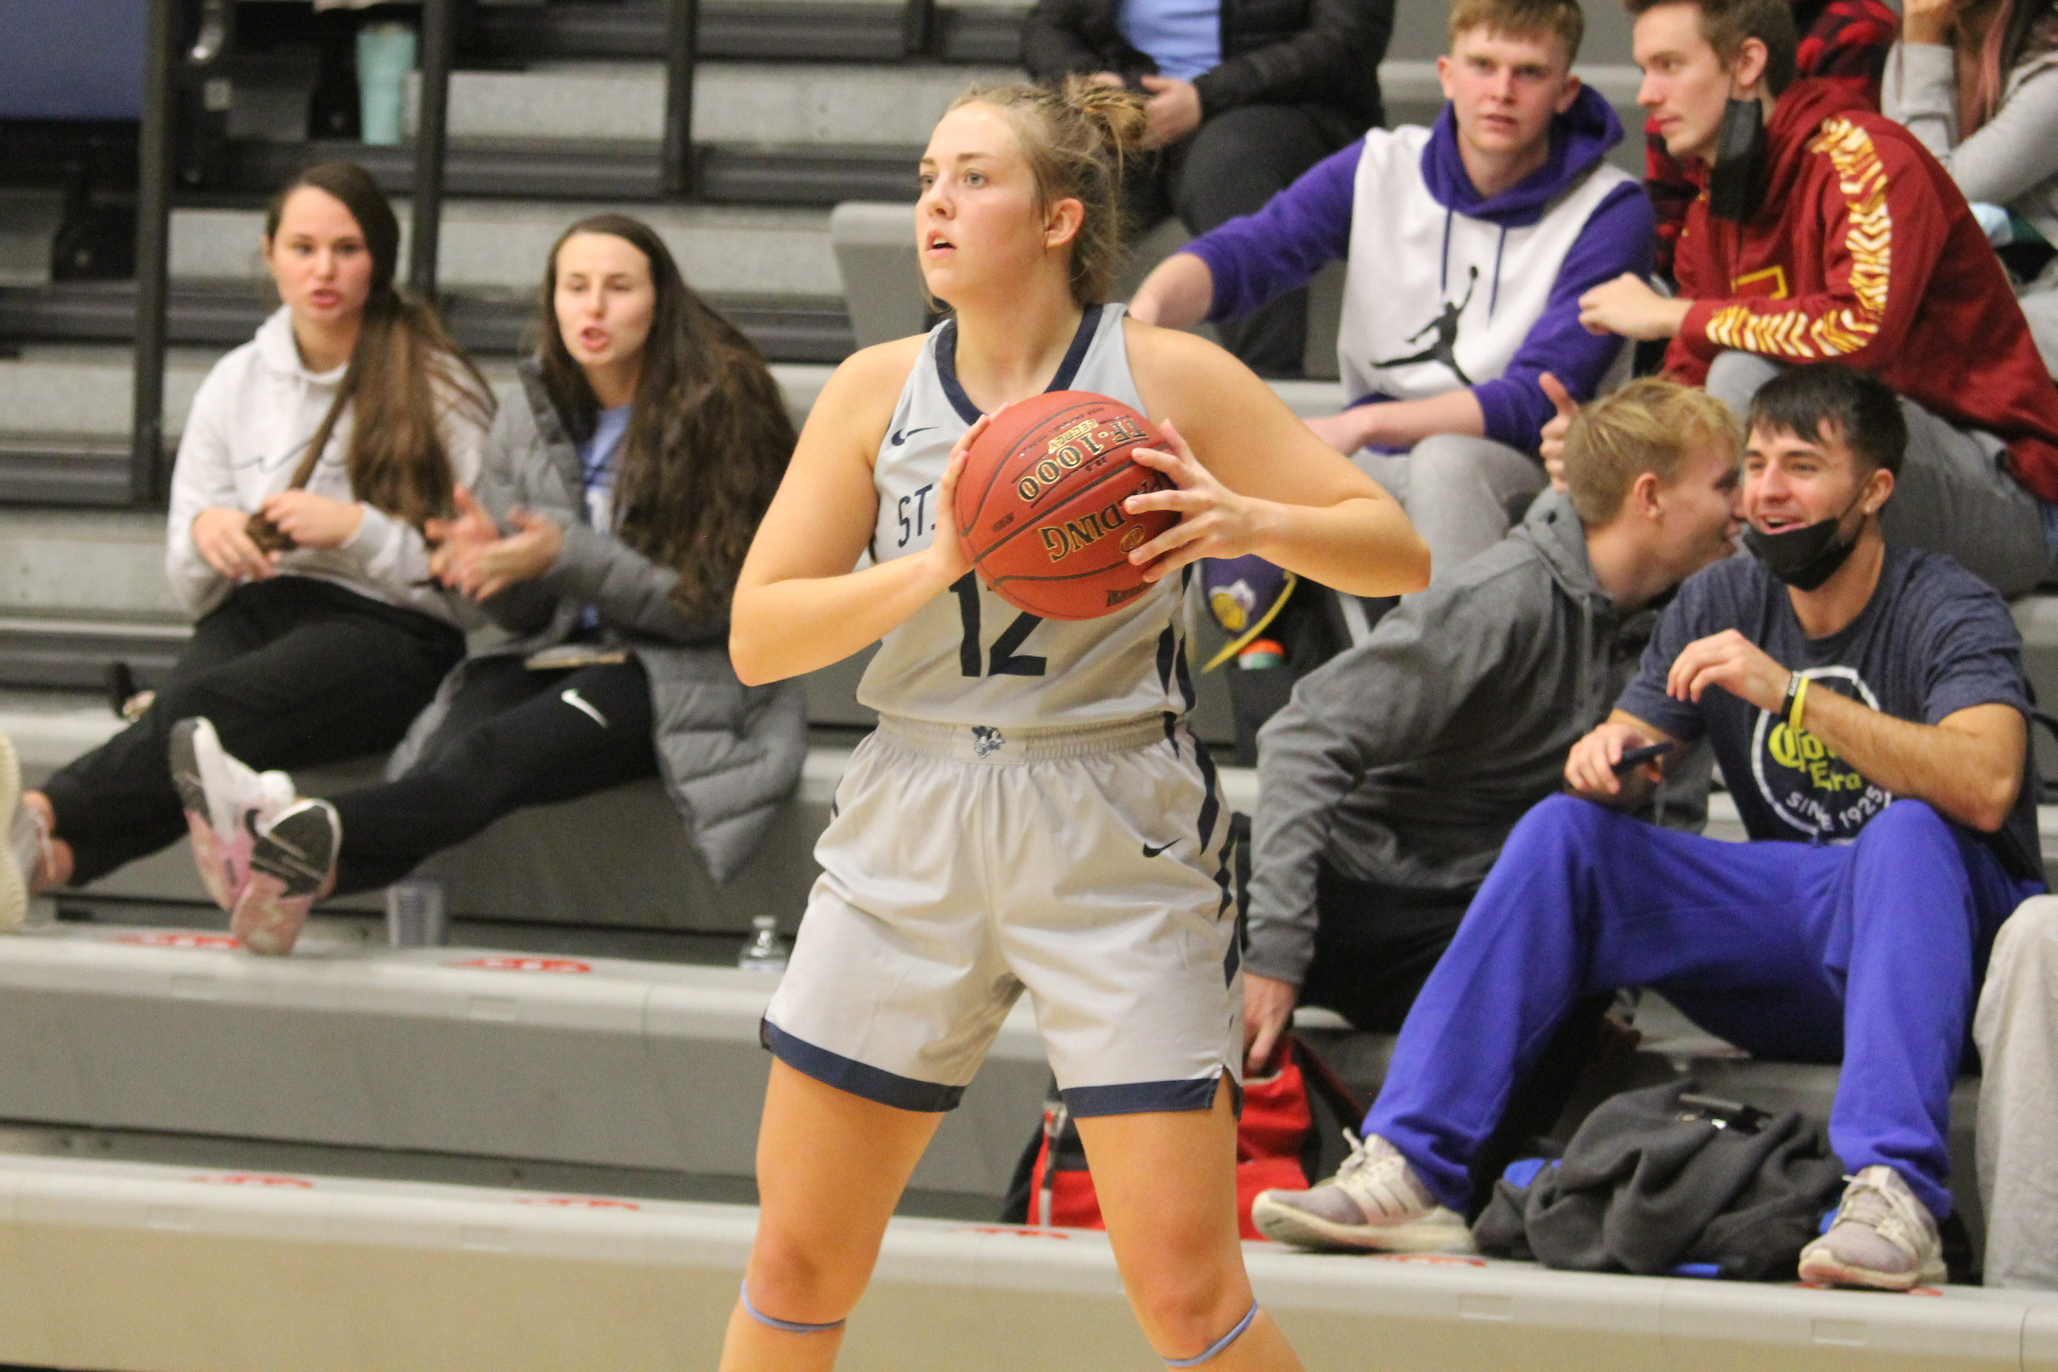 St. Ambrose moves to 3-0 with win at Mount Mercy